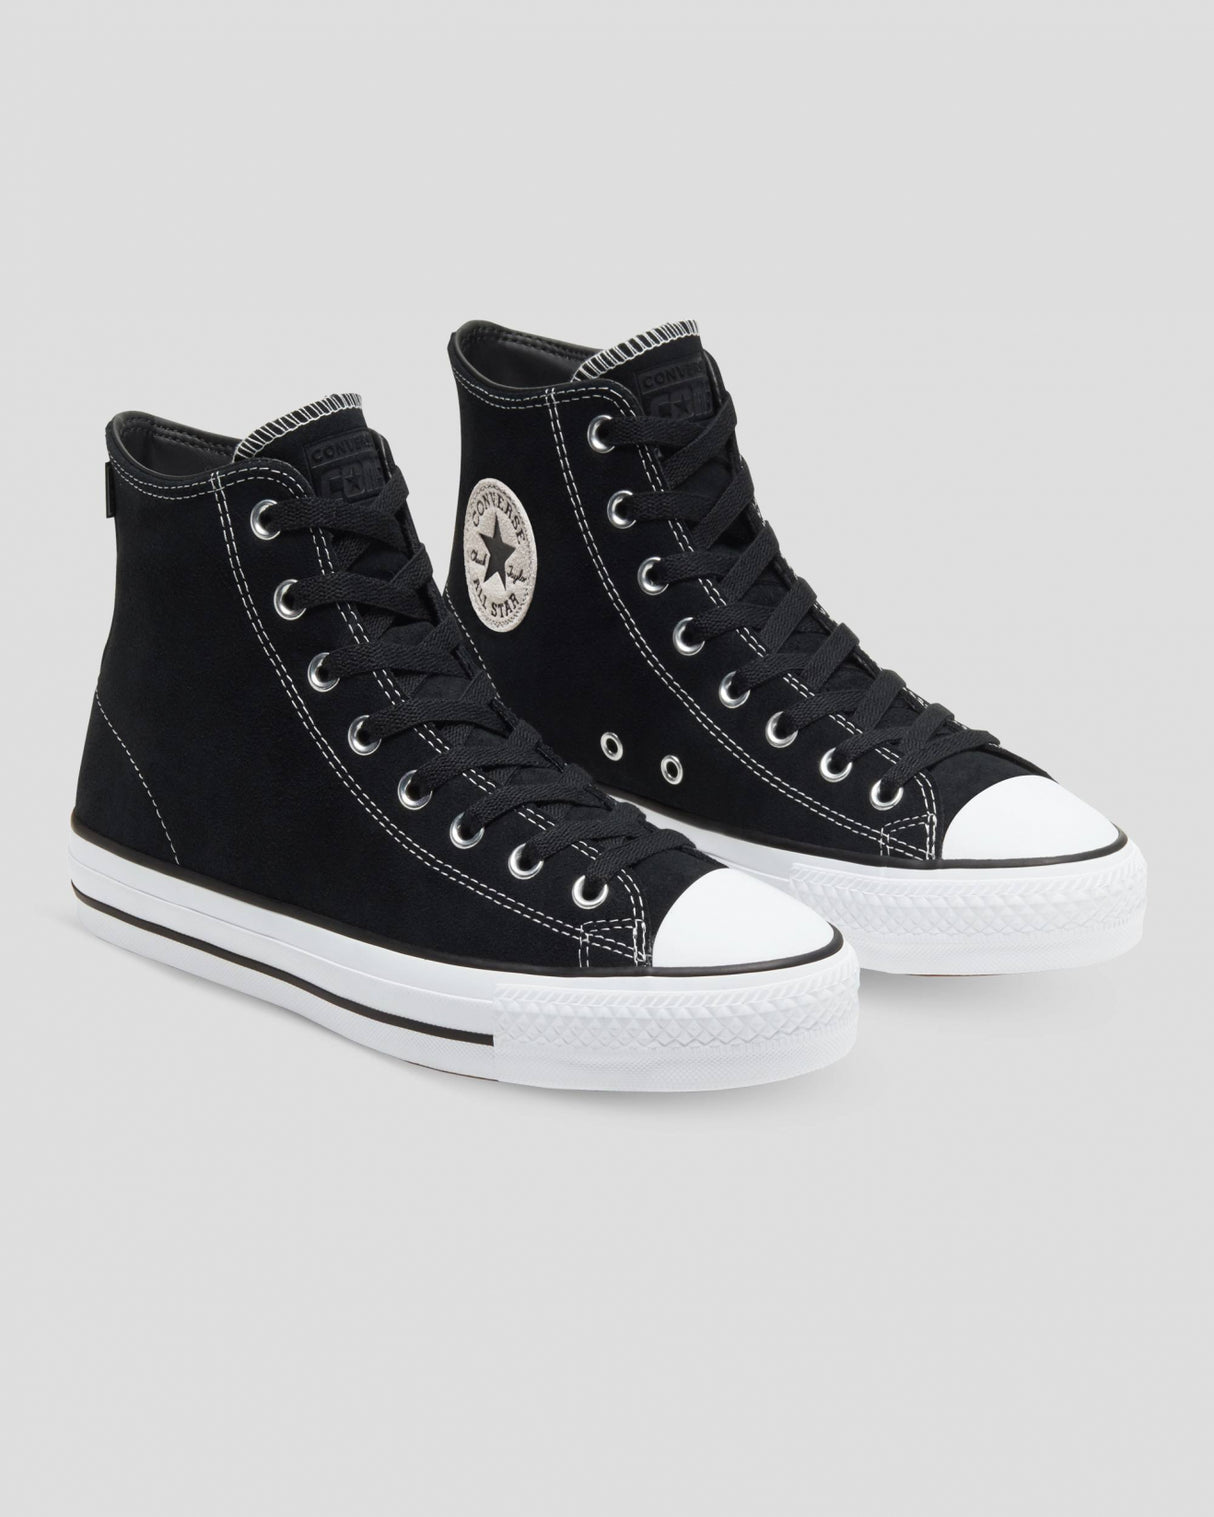 Converse Cons | Chuck Taylor All Star Pro Hi Suede Shoes